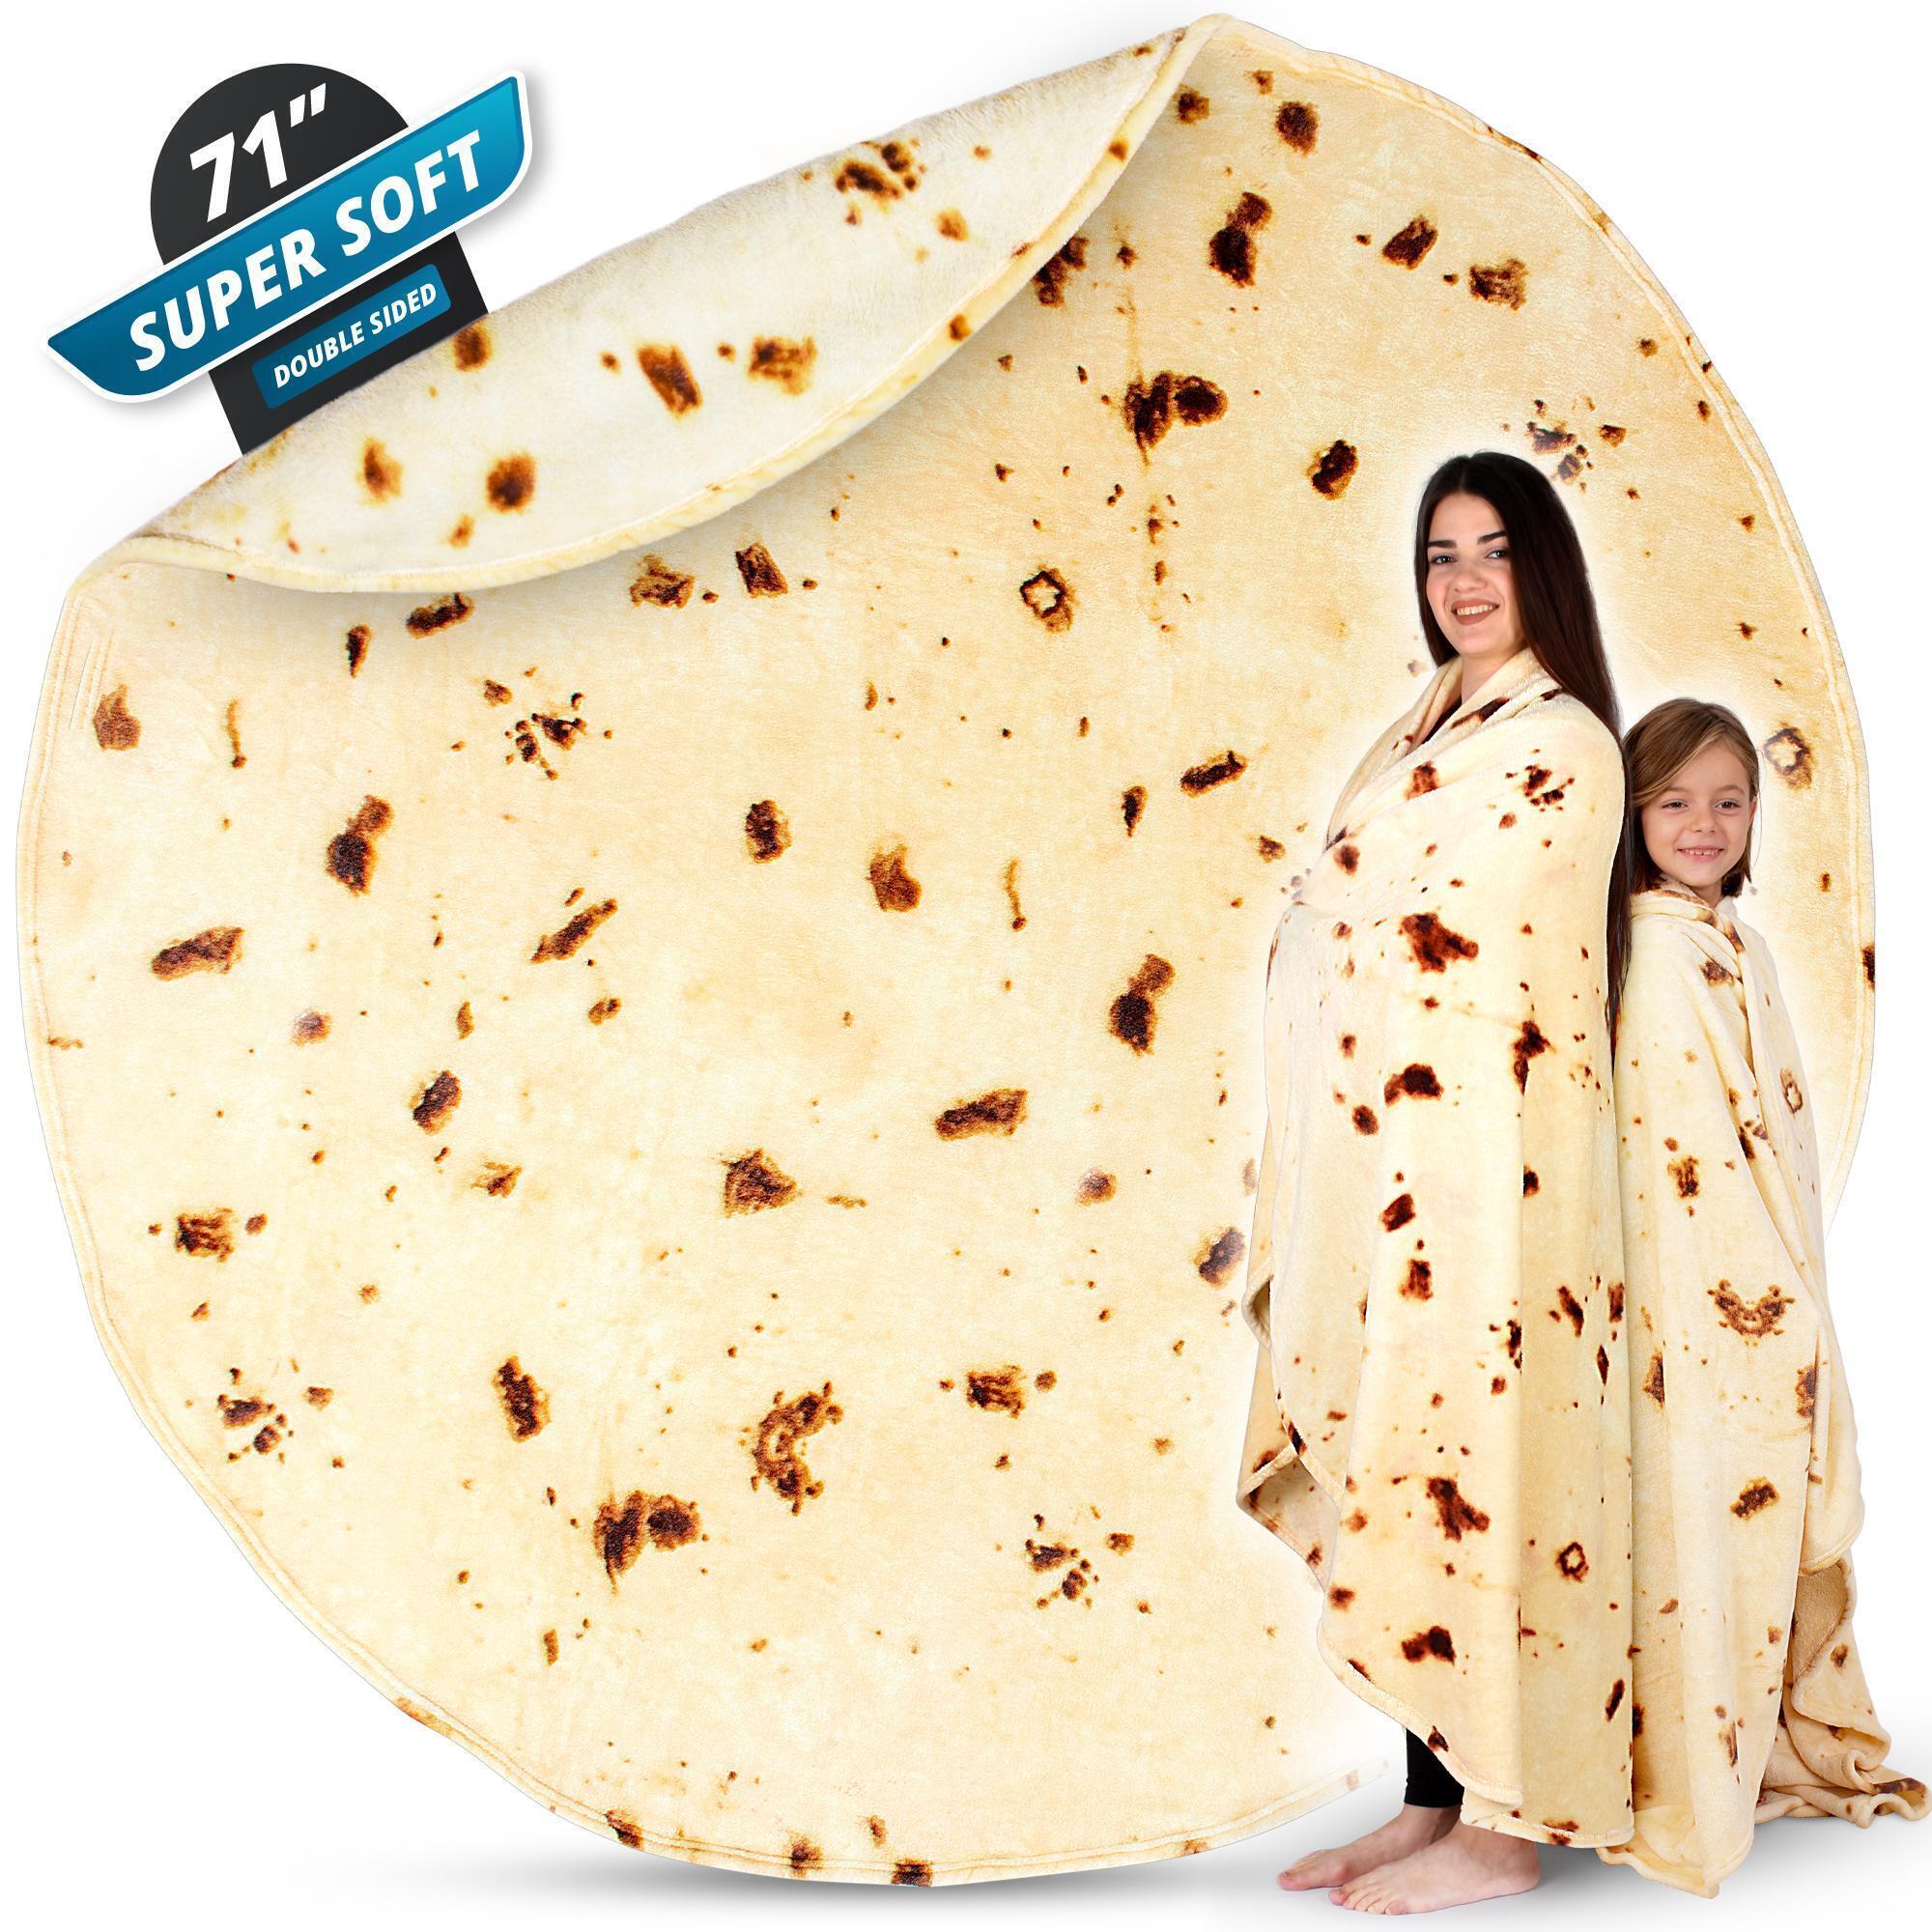 Zulay Kitchen Giant Tortilla Blanket Double Sided - Novelty Big Tortilla Blanket for Adult and Kids - Premium Soft Flannel Round Tortilla Blanket for Indoors, Outdoors, Travel, Home and More alternate image